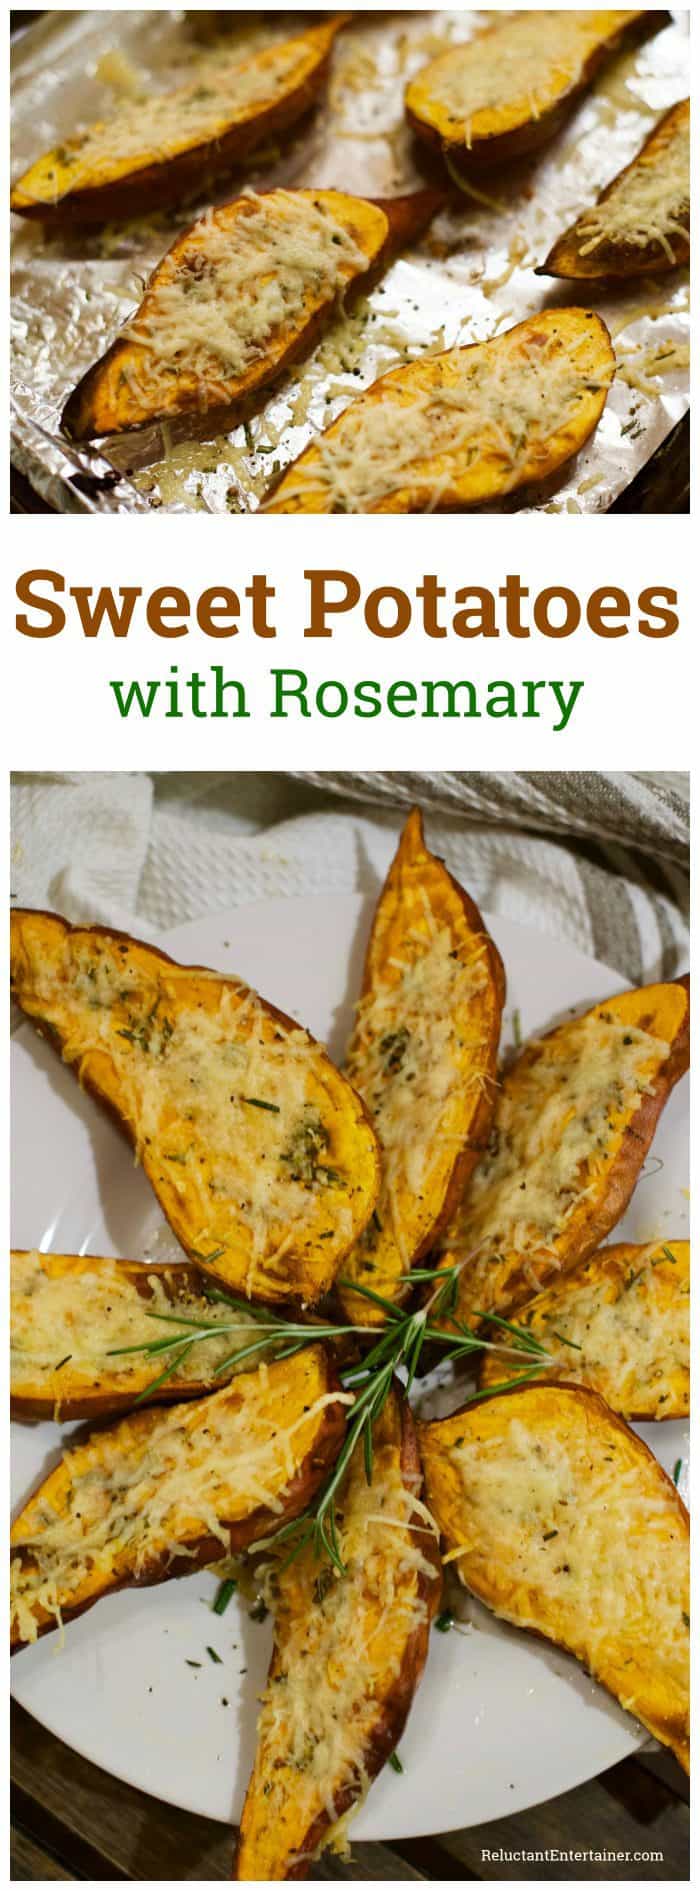 Easy Side Dish Roasted Sweet Potatoes With Rosemary Recipe 